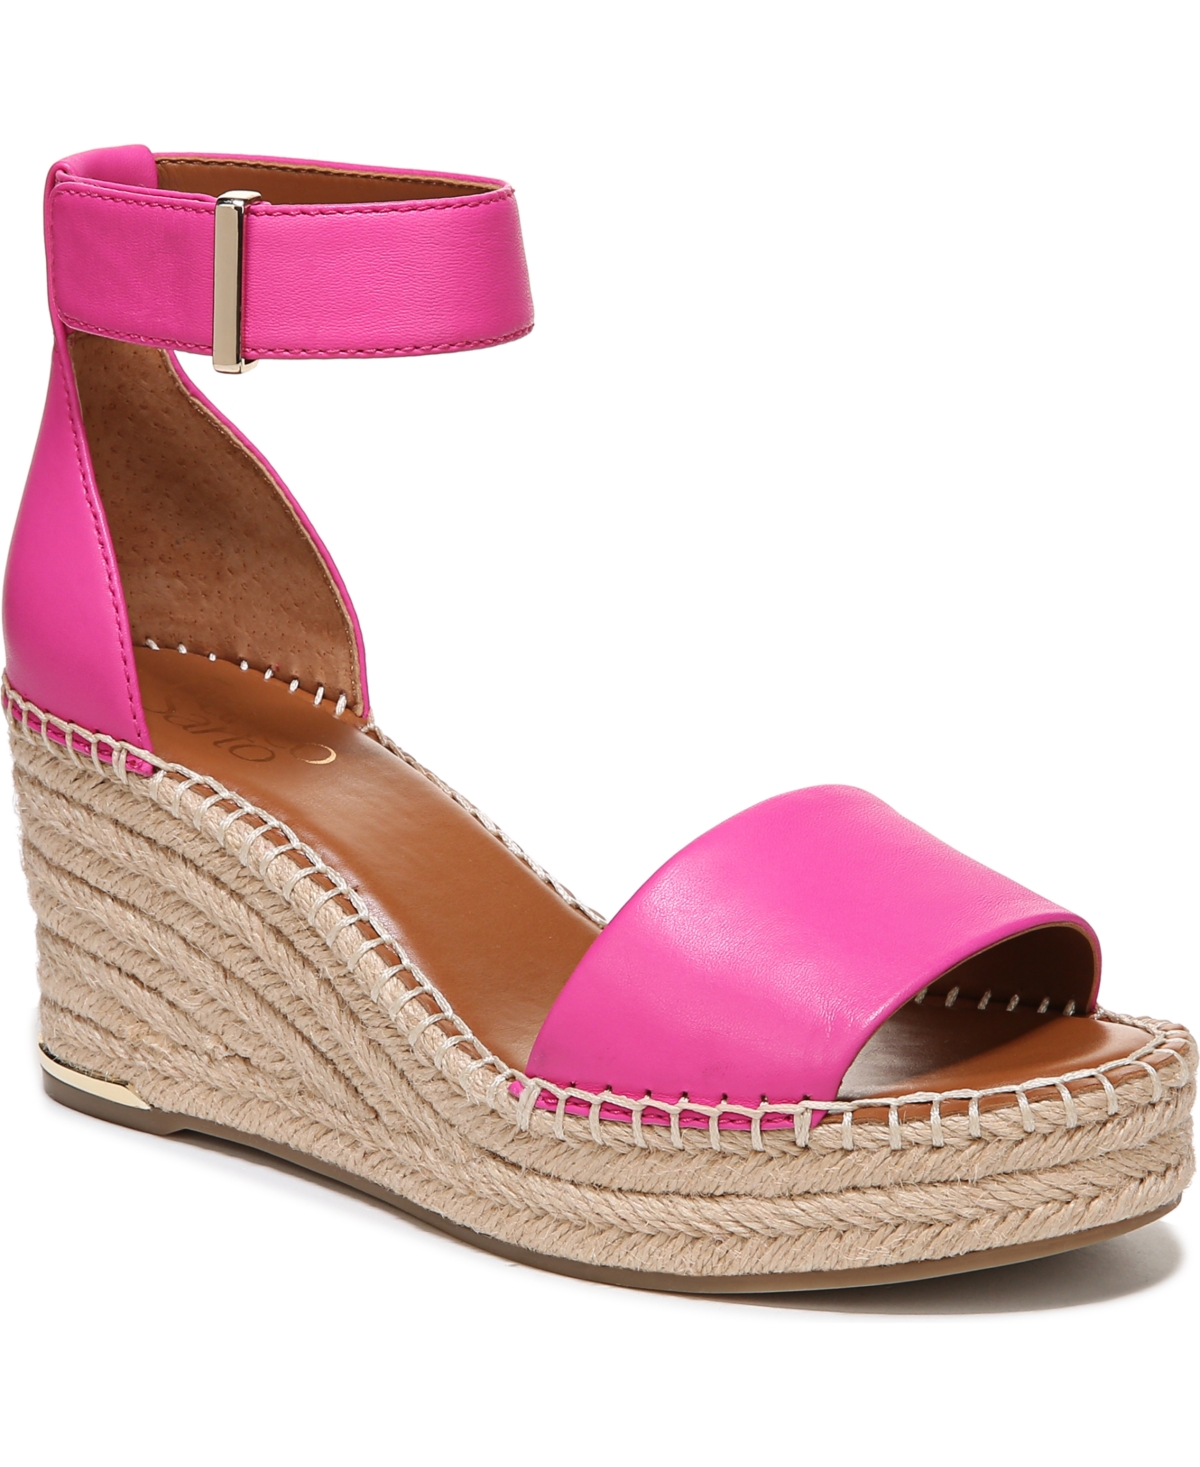 Franco Sarto Clemens Espadrille Wedge Sandals In Pink Leather